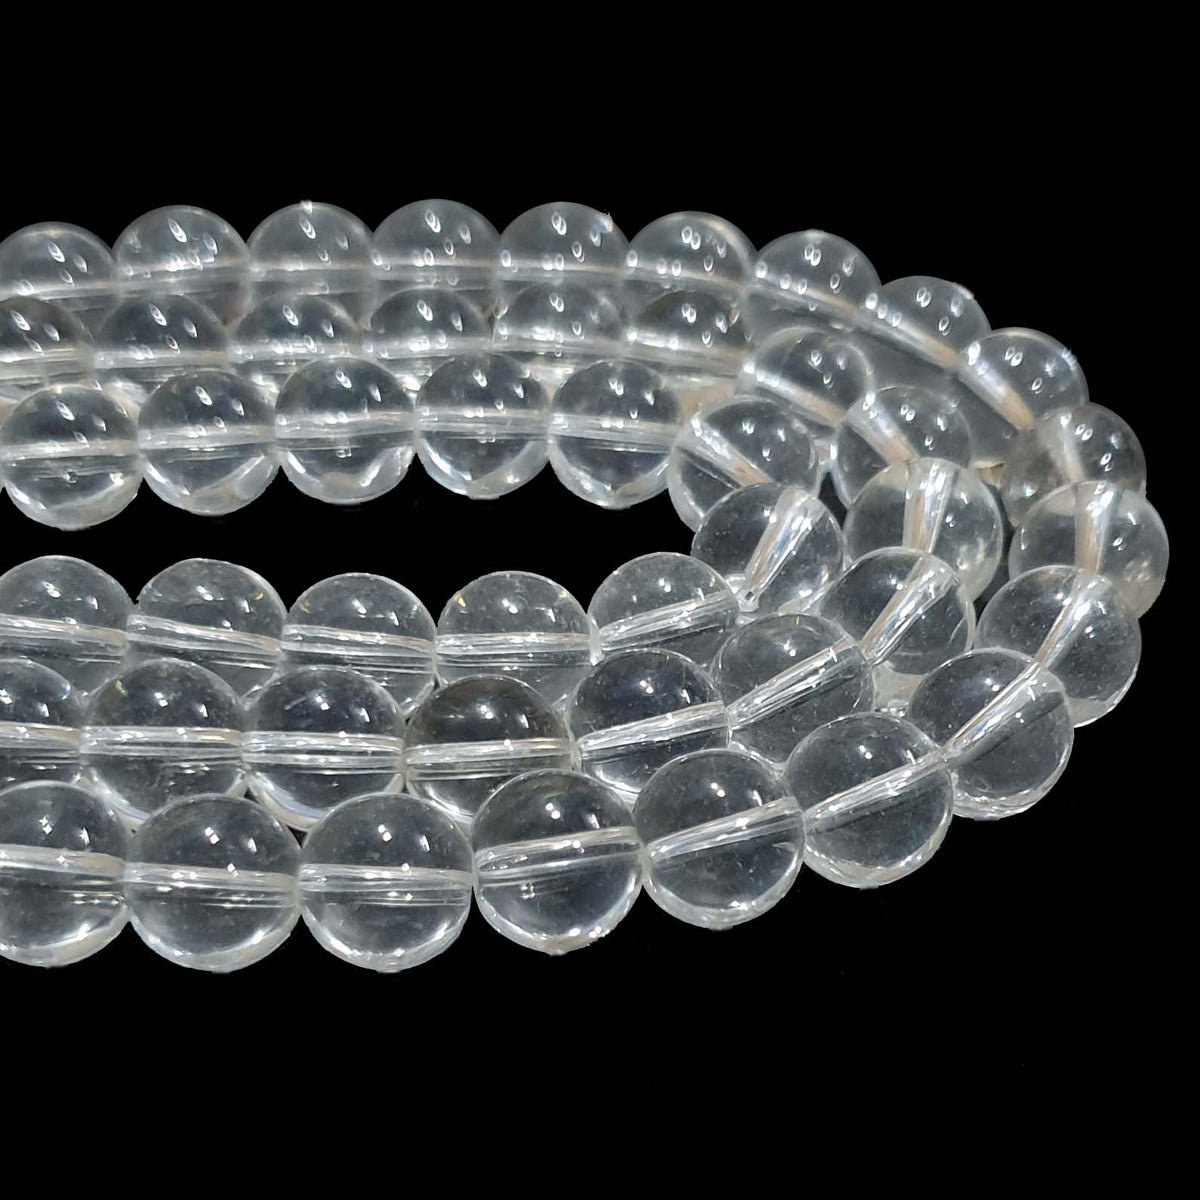 10mm Round Crystal Quartz Sphtic Semi Precious Beads About 43 Beads in a Line